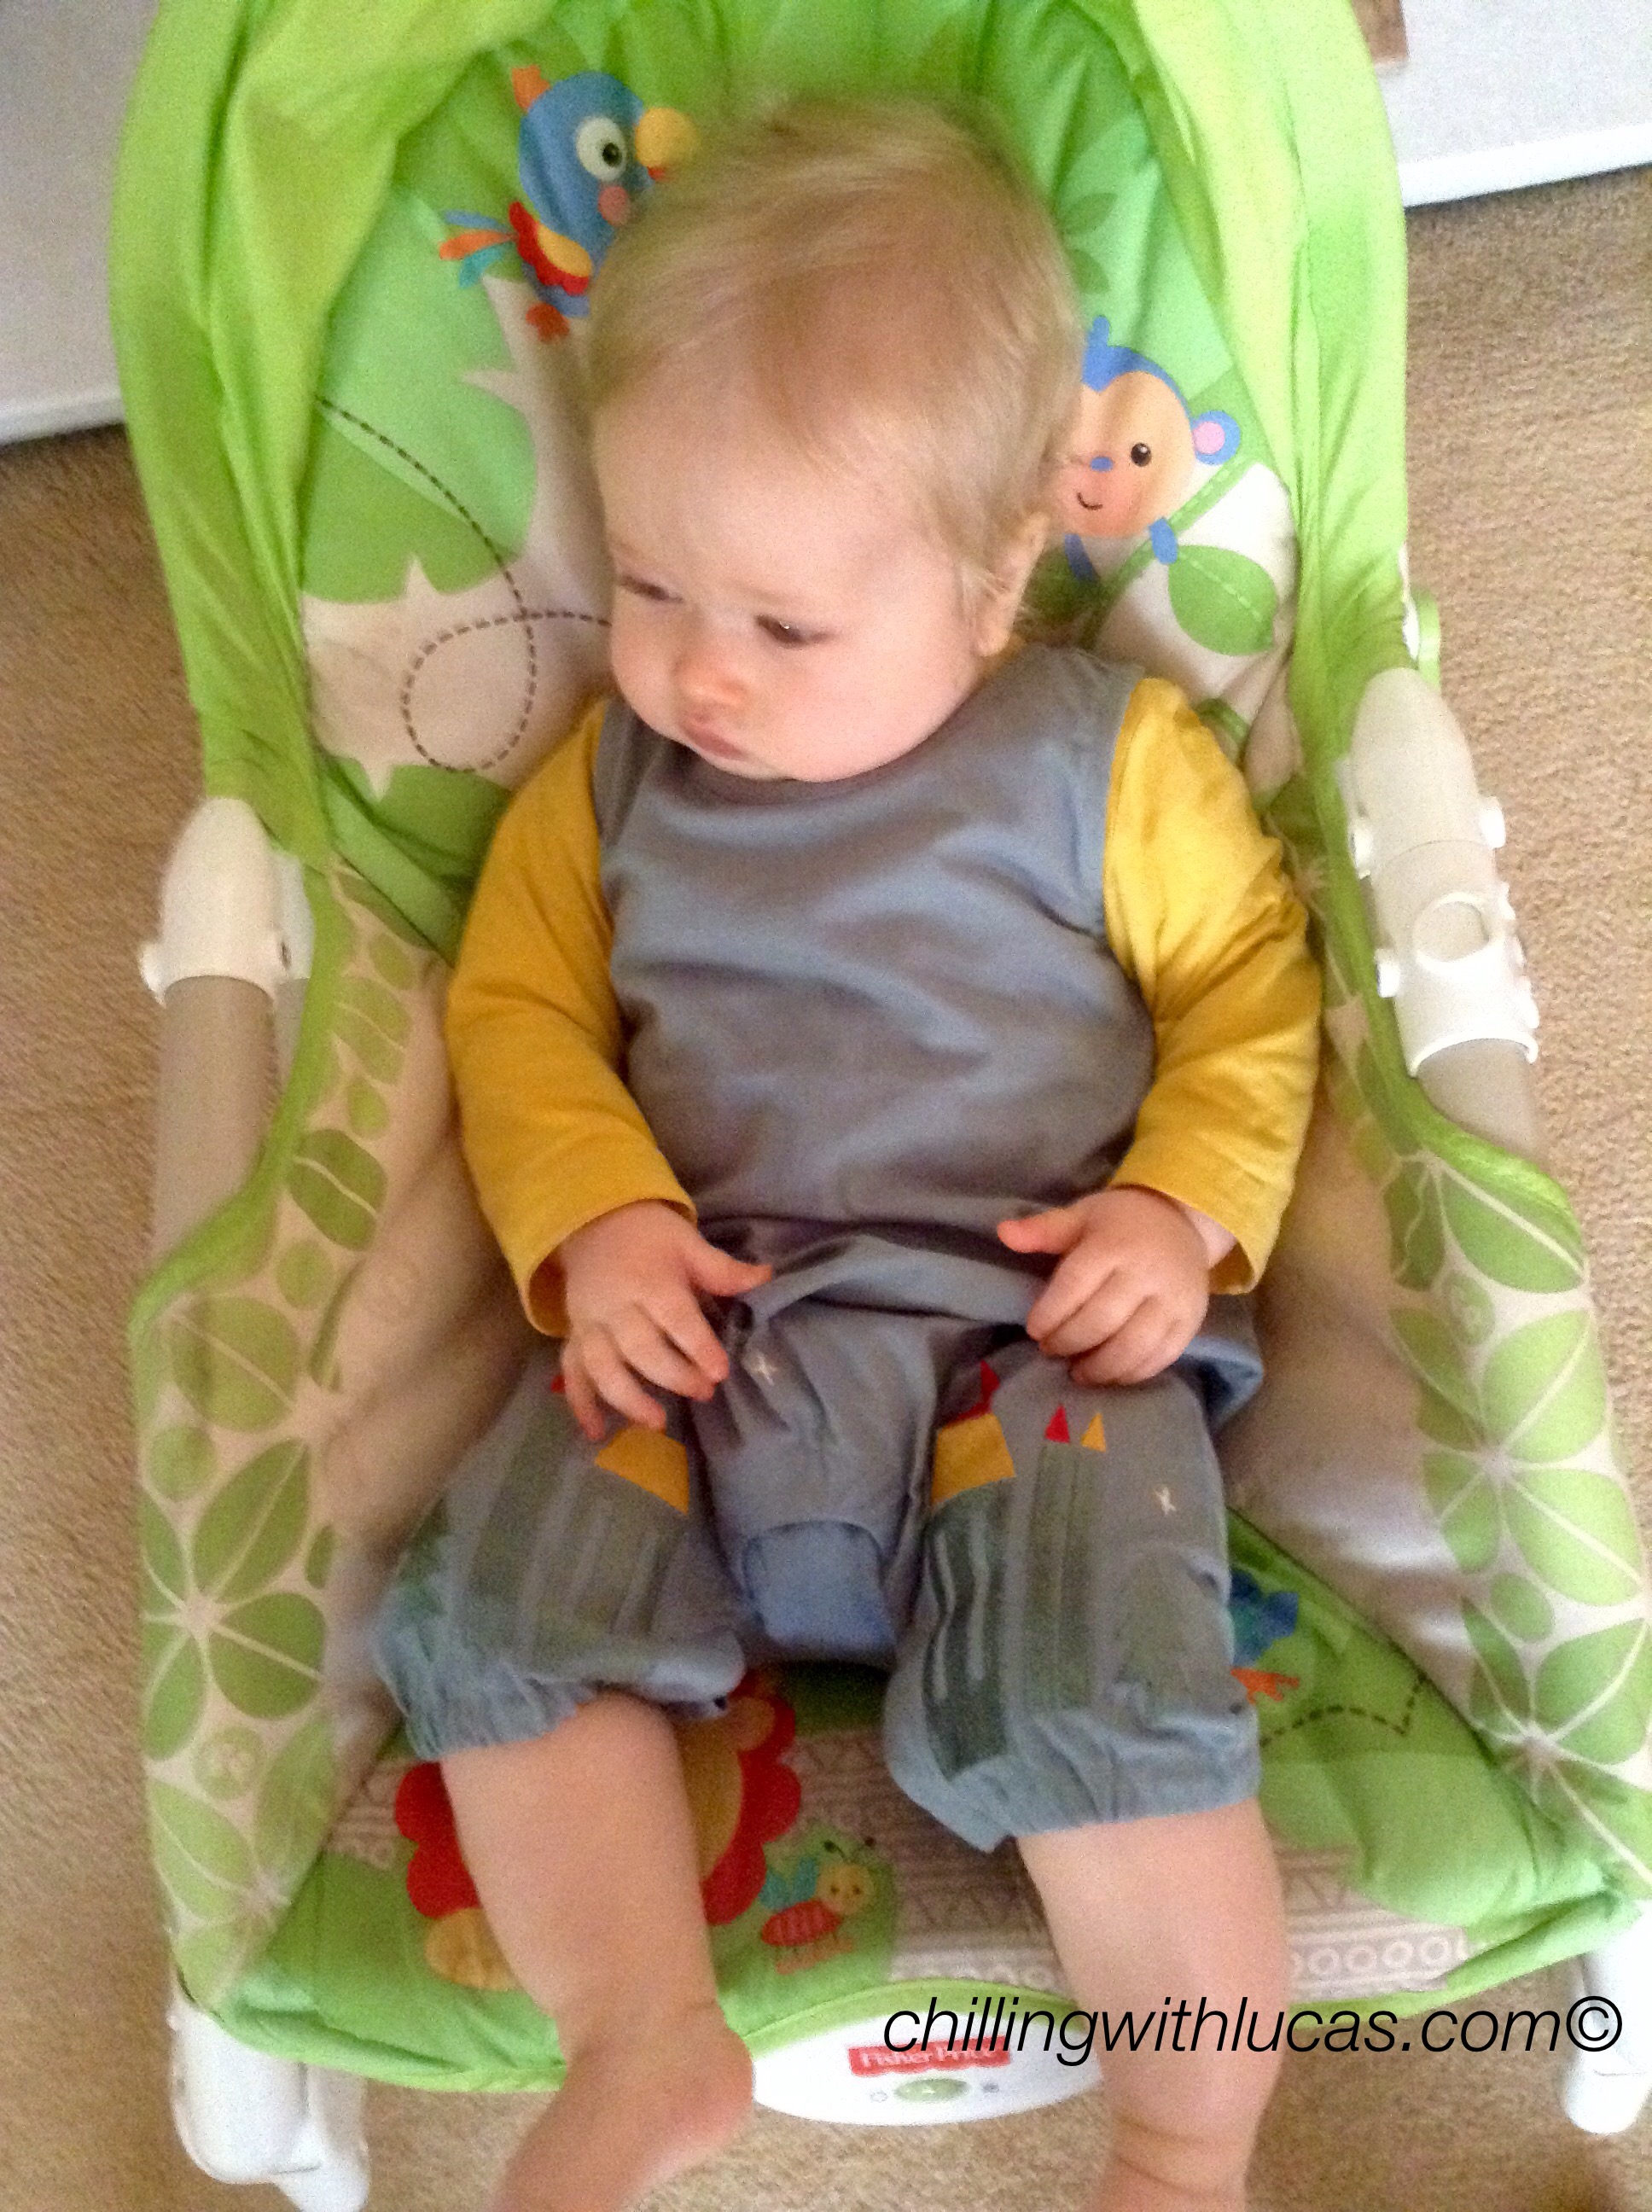 lucas wearing Little green radicals enchanted castles dungarees in the chair